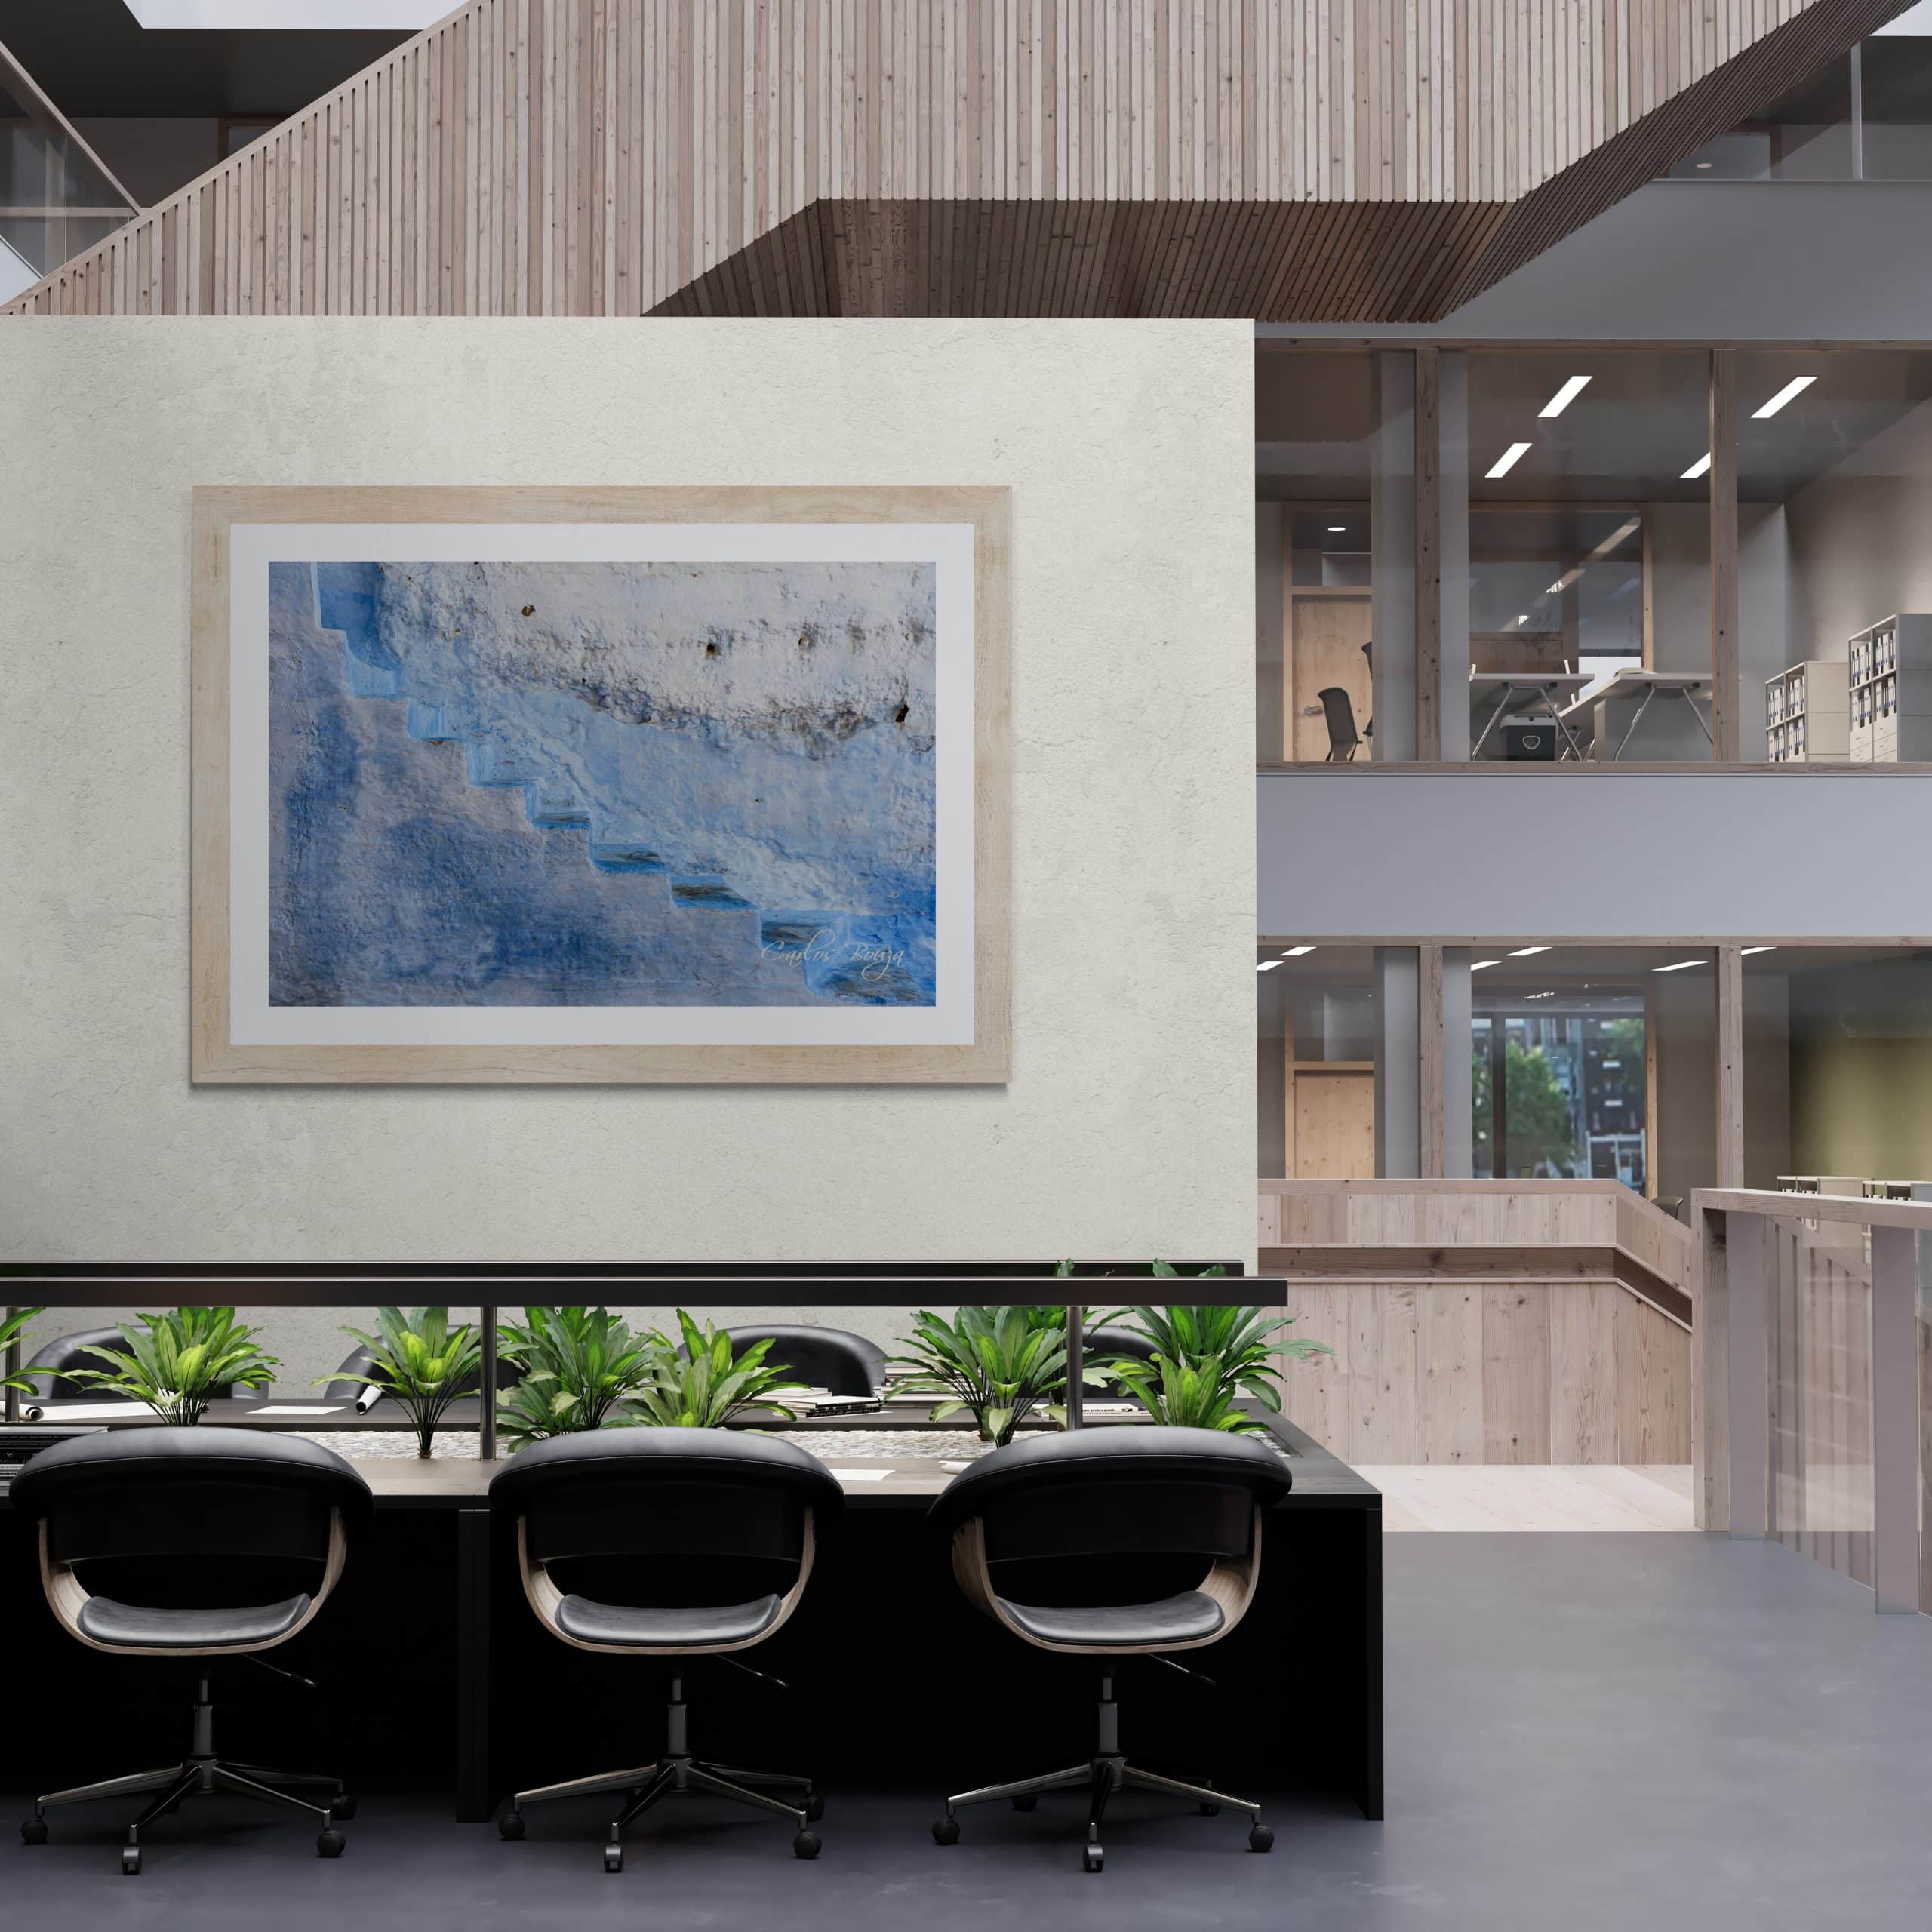 fine art photography in commercial spaces beyond the home